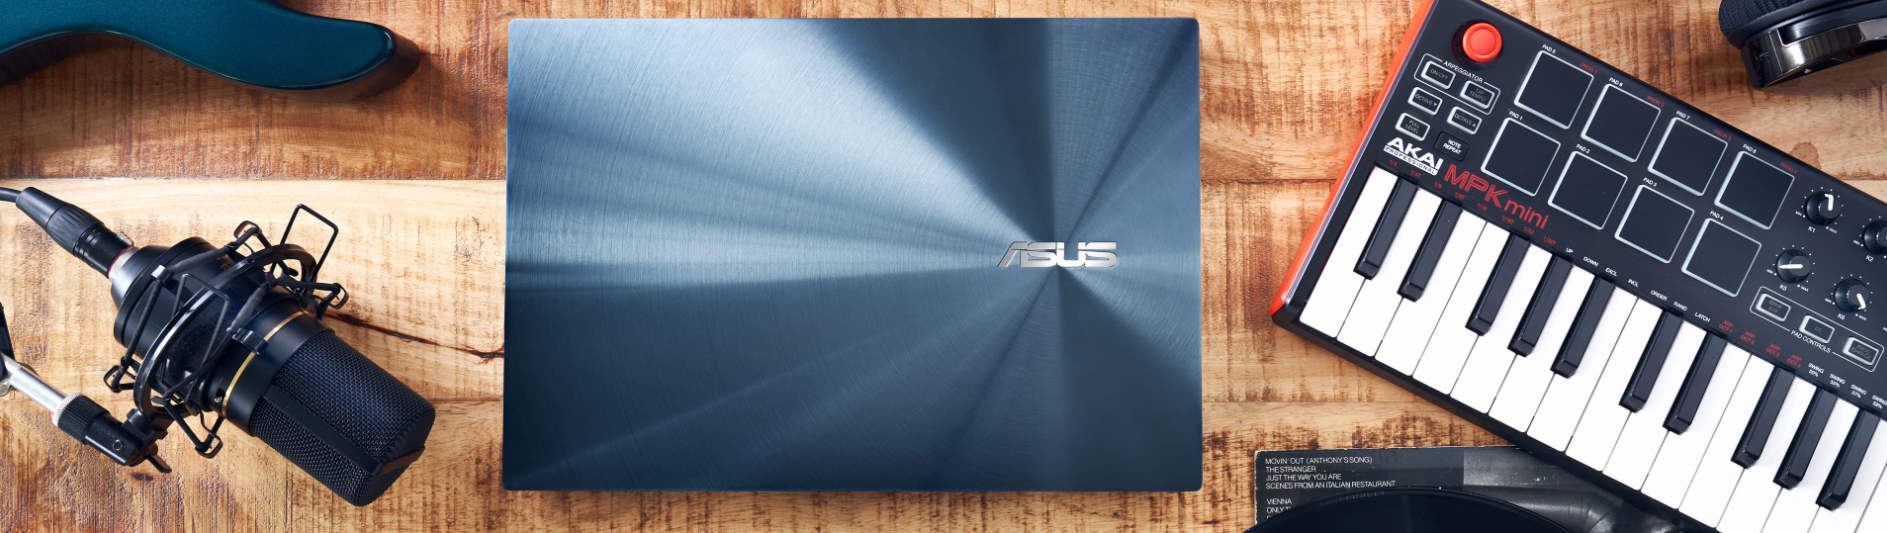 ASUS Commercial Notebook | IOT Solution for Business